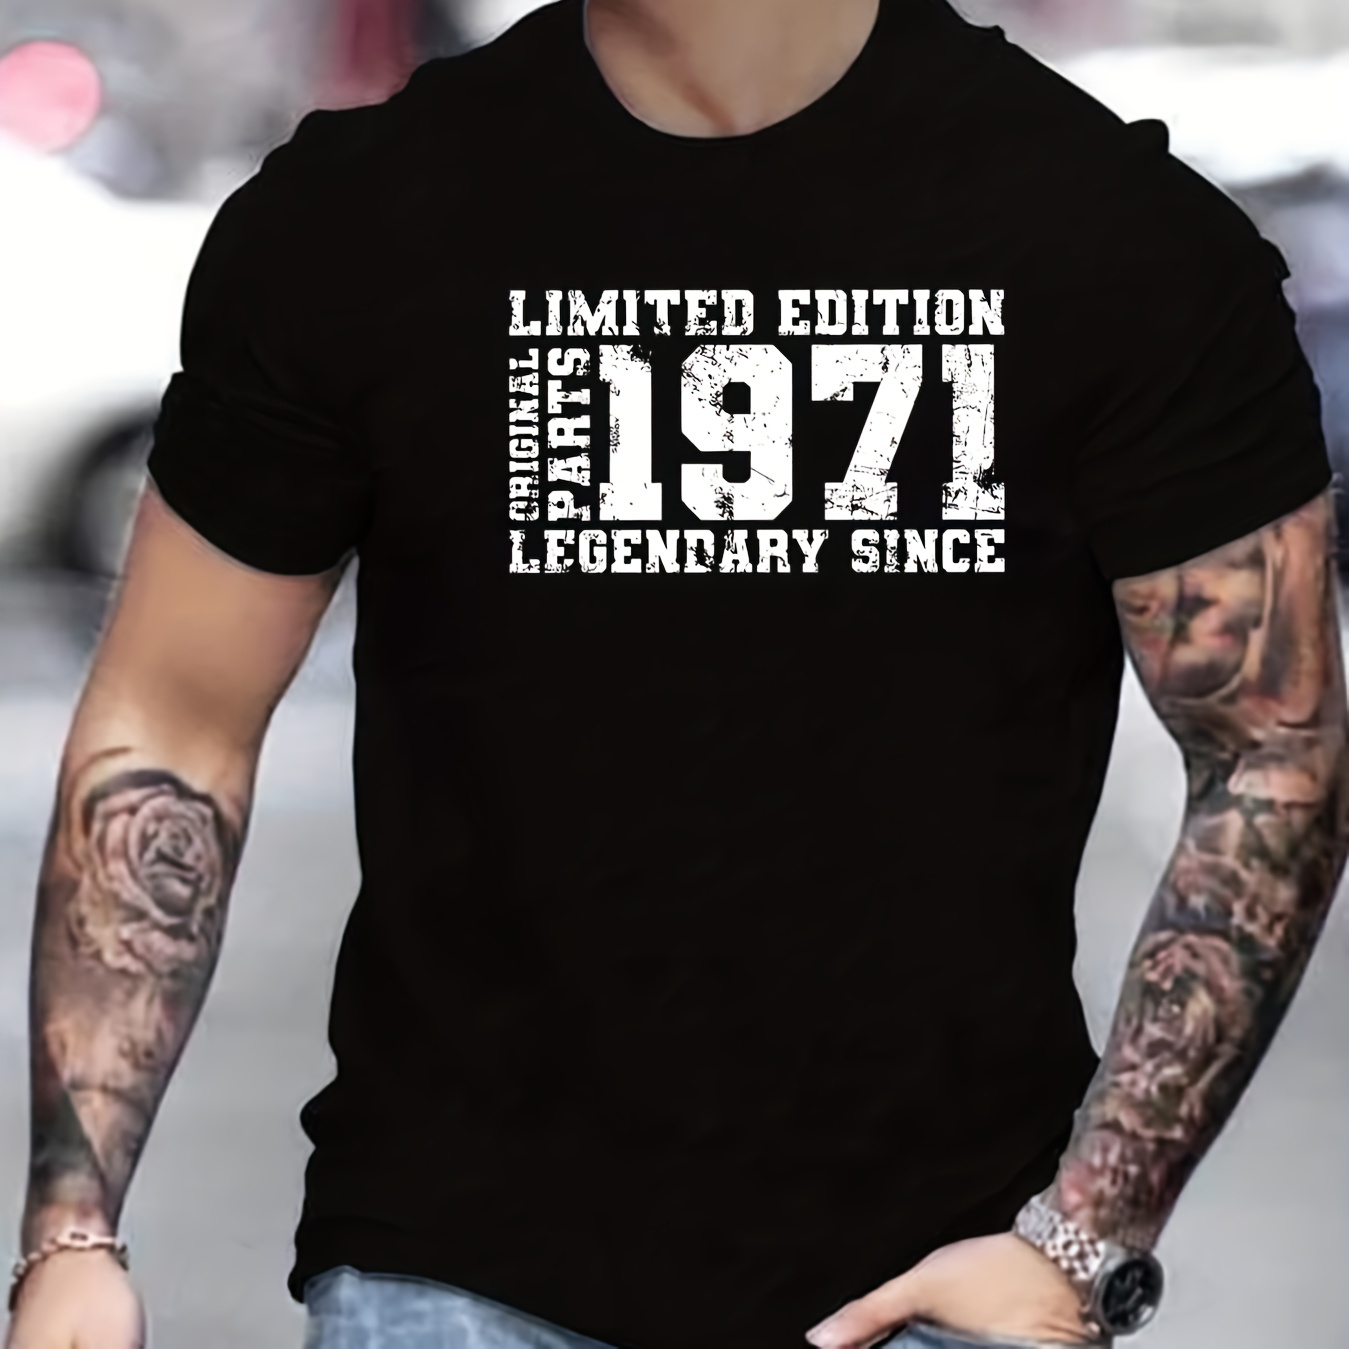 

Limited 1971 Edition" Letters Print Casual Crew Neck Short Sleeve Tops For Men, Quick-drying Comfy Casual Summer T-shirt For Daily Wear Work Out And Vacation Resorts